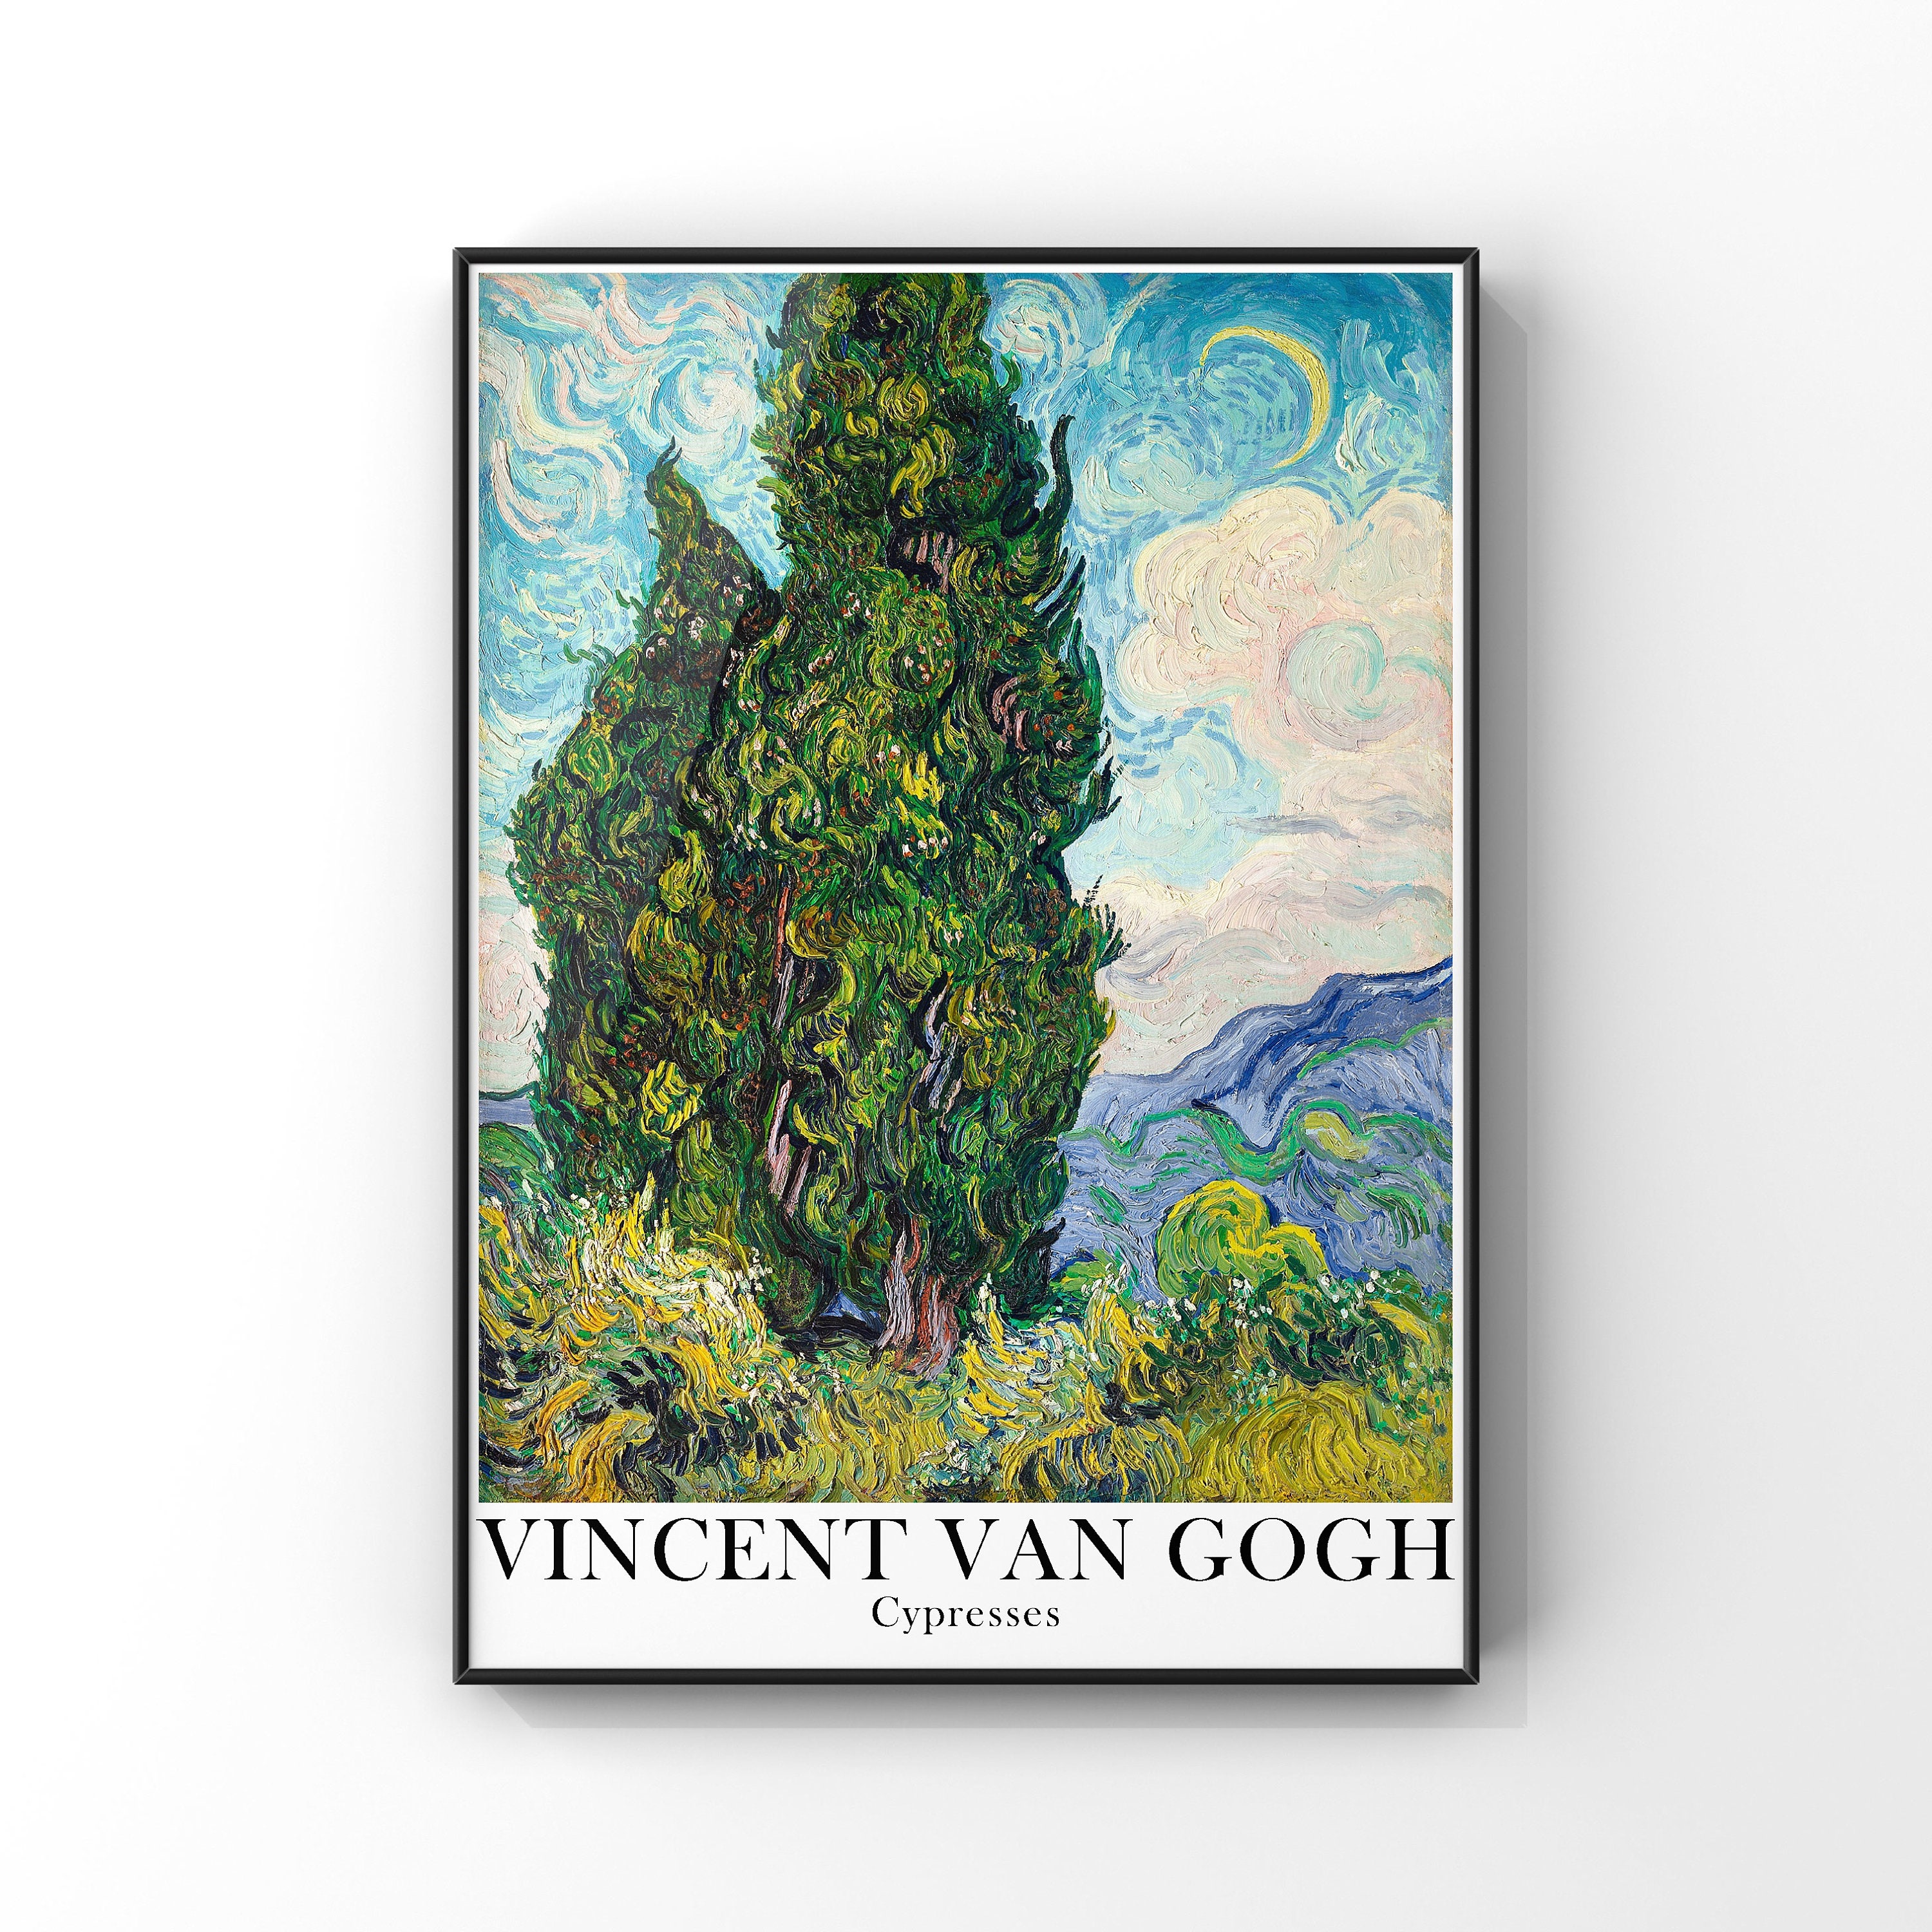 GIFT  POSTER # 3 Vincent Van Gog PAINTING  WALL DECOR A3/A4 SIZE Cypresses